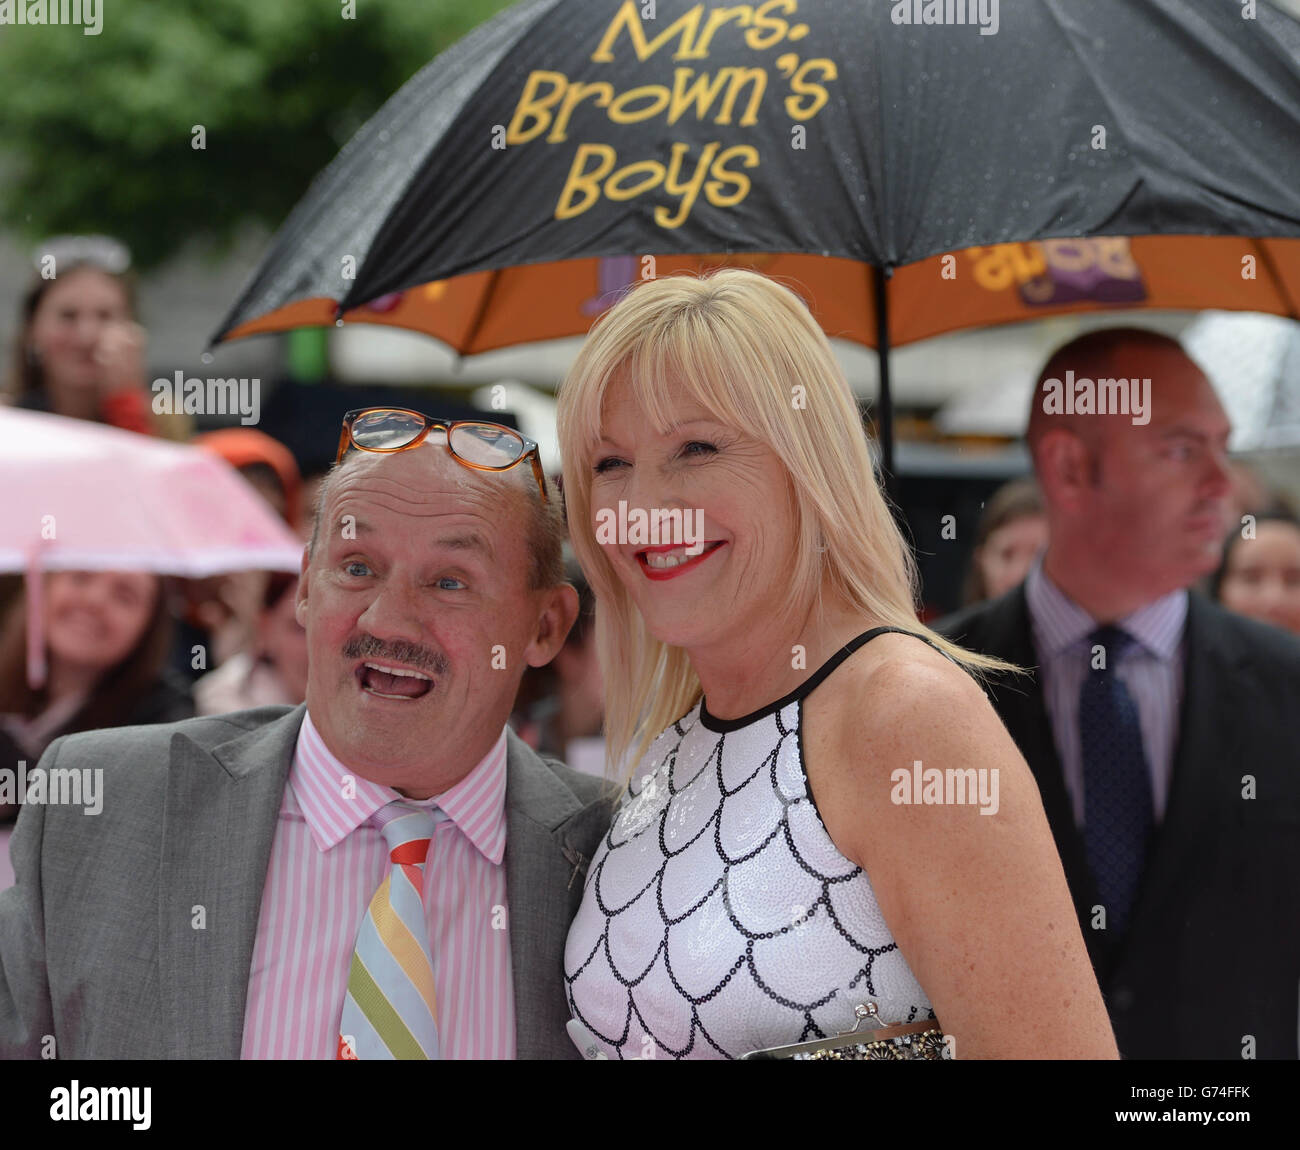 Brendan O'Carroll and Jennifer Gibney attending the world premiere of Mrs Brown's Boys D'Movie at the Savoy Cinema in O'Connell Street, Dublin. PRESS ASSOCIATION Photo. Picture date: Wednesday June 25, 2014. Photo credit should read: Artur Widak/PA Wire Stock Photo